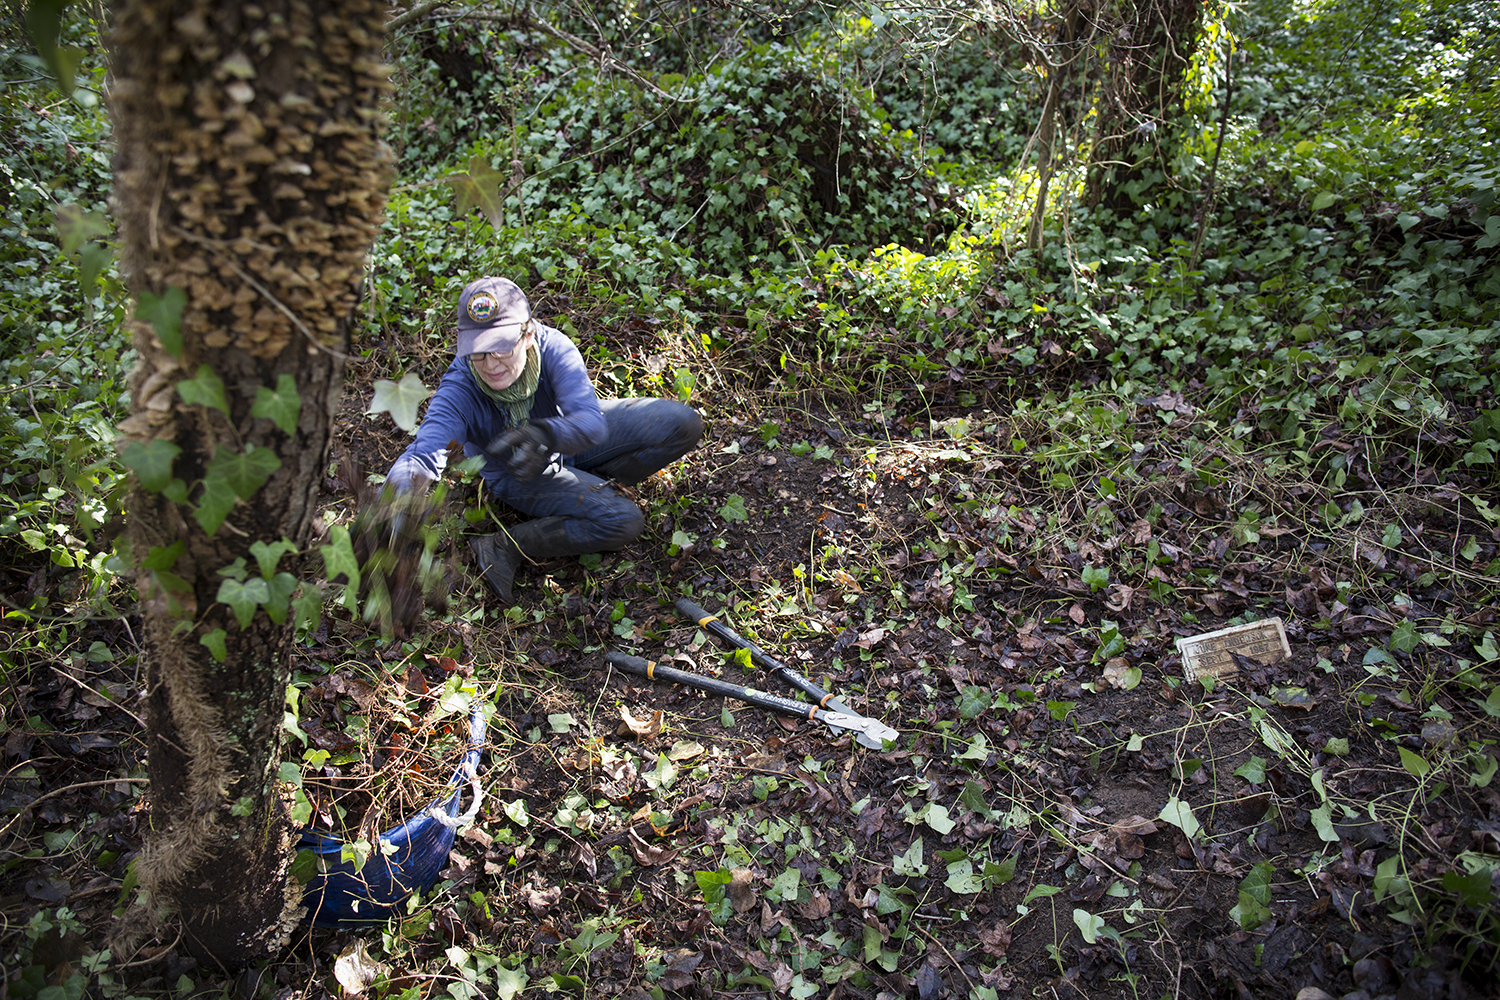  Erin clears invasive plants and vines&nbsp;from graves,&nbsp;East End Cemetery work day, January 2015.&nbsp;©brianpalmer.photos 2015       